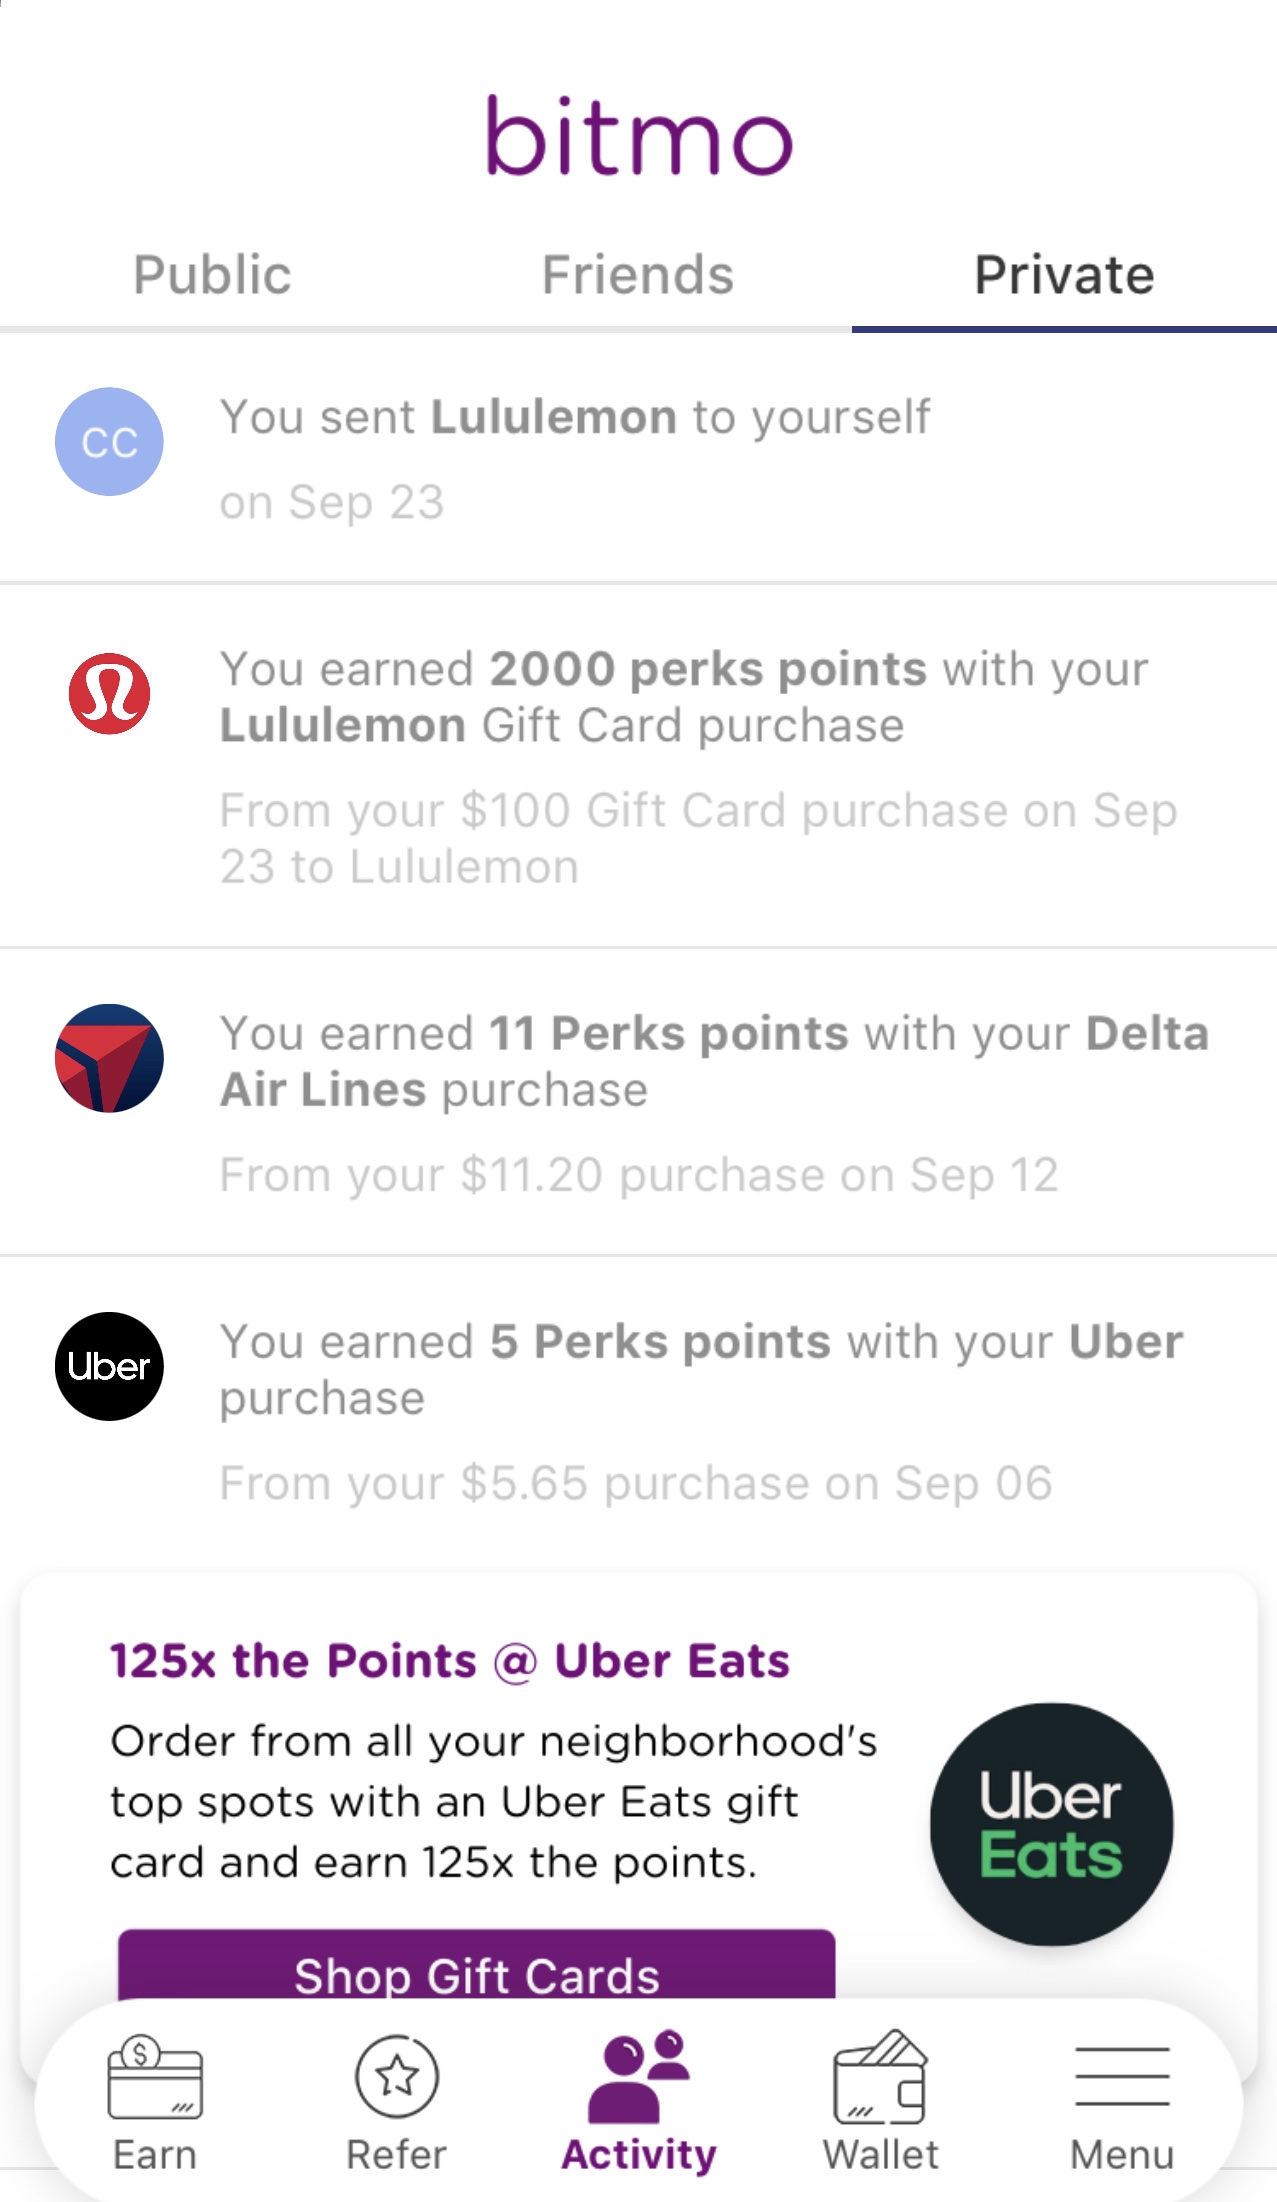 Earning Bitmo Perks points with a Delta Air Lines purchase.